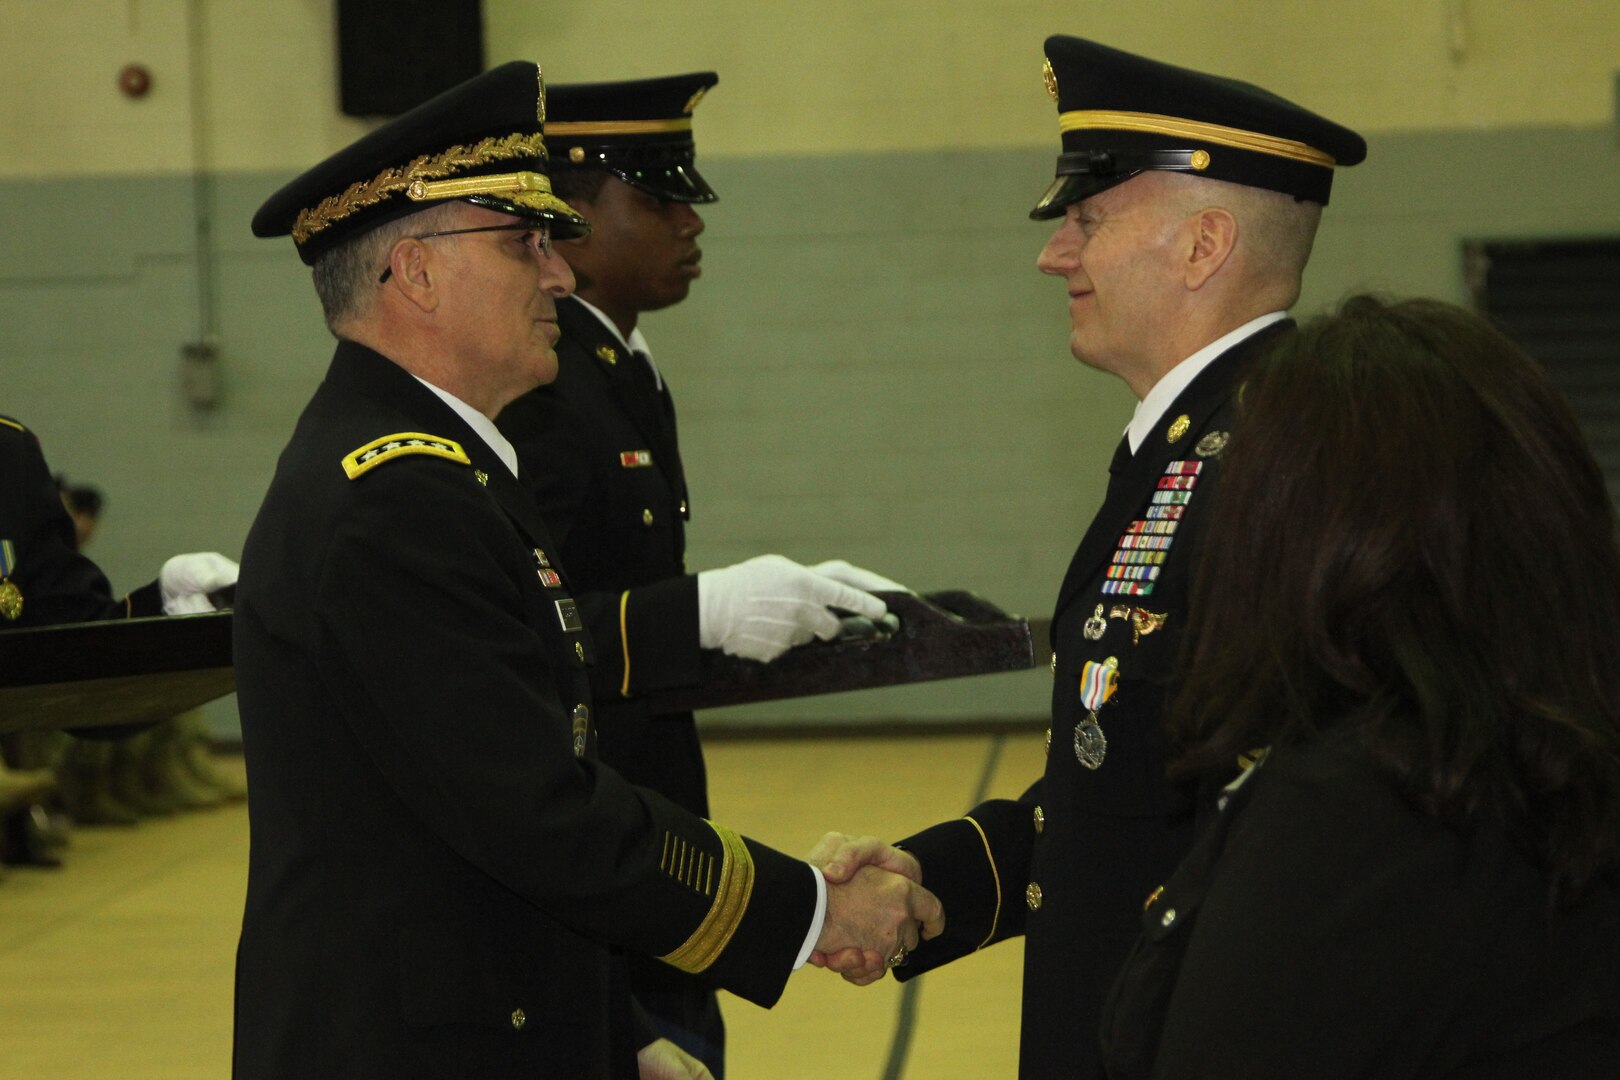 Outgoing United States Forces Korea Command Sergeant Major John Troxell shakes hands with Gen. Curtis M. Scaparrotti during Troxell's Change of Responsibility Ceremony. Troxell was selected to become the 20th Senior Enlisted Advisor to the Chief of Staff. (U.S. Army photo by Cpl. Choi, Woo-hyuk)